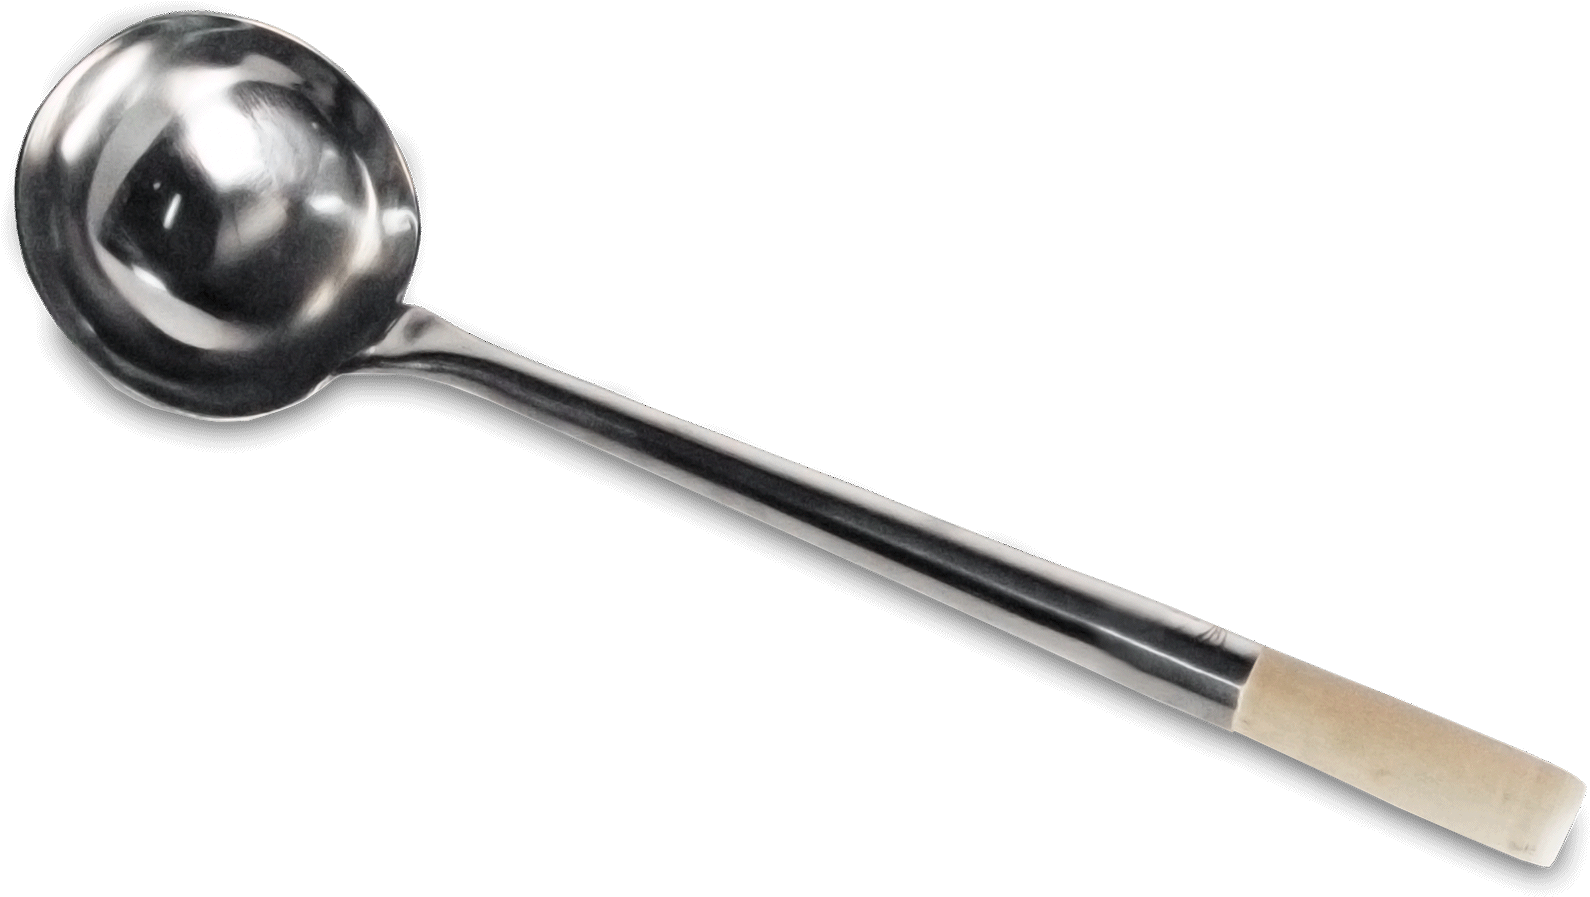 88111 88111 - Wok Ladle Clipart - Large Size Png Image - PikPng